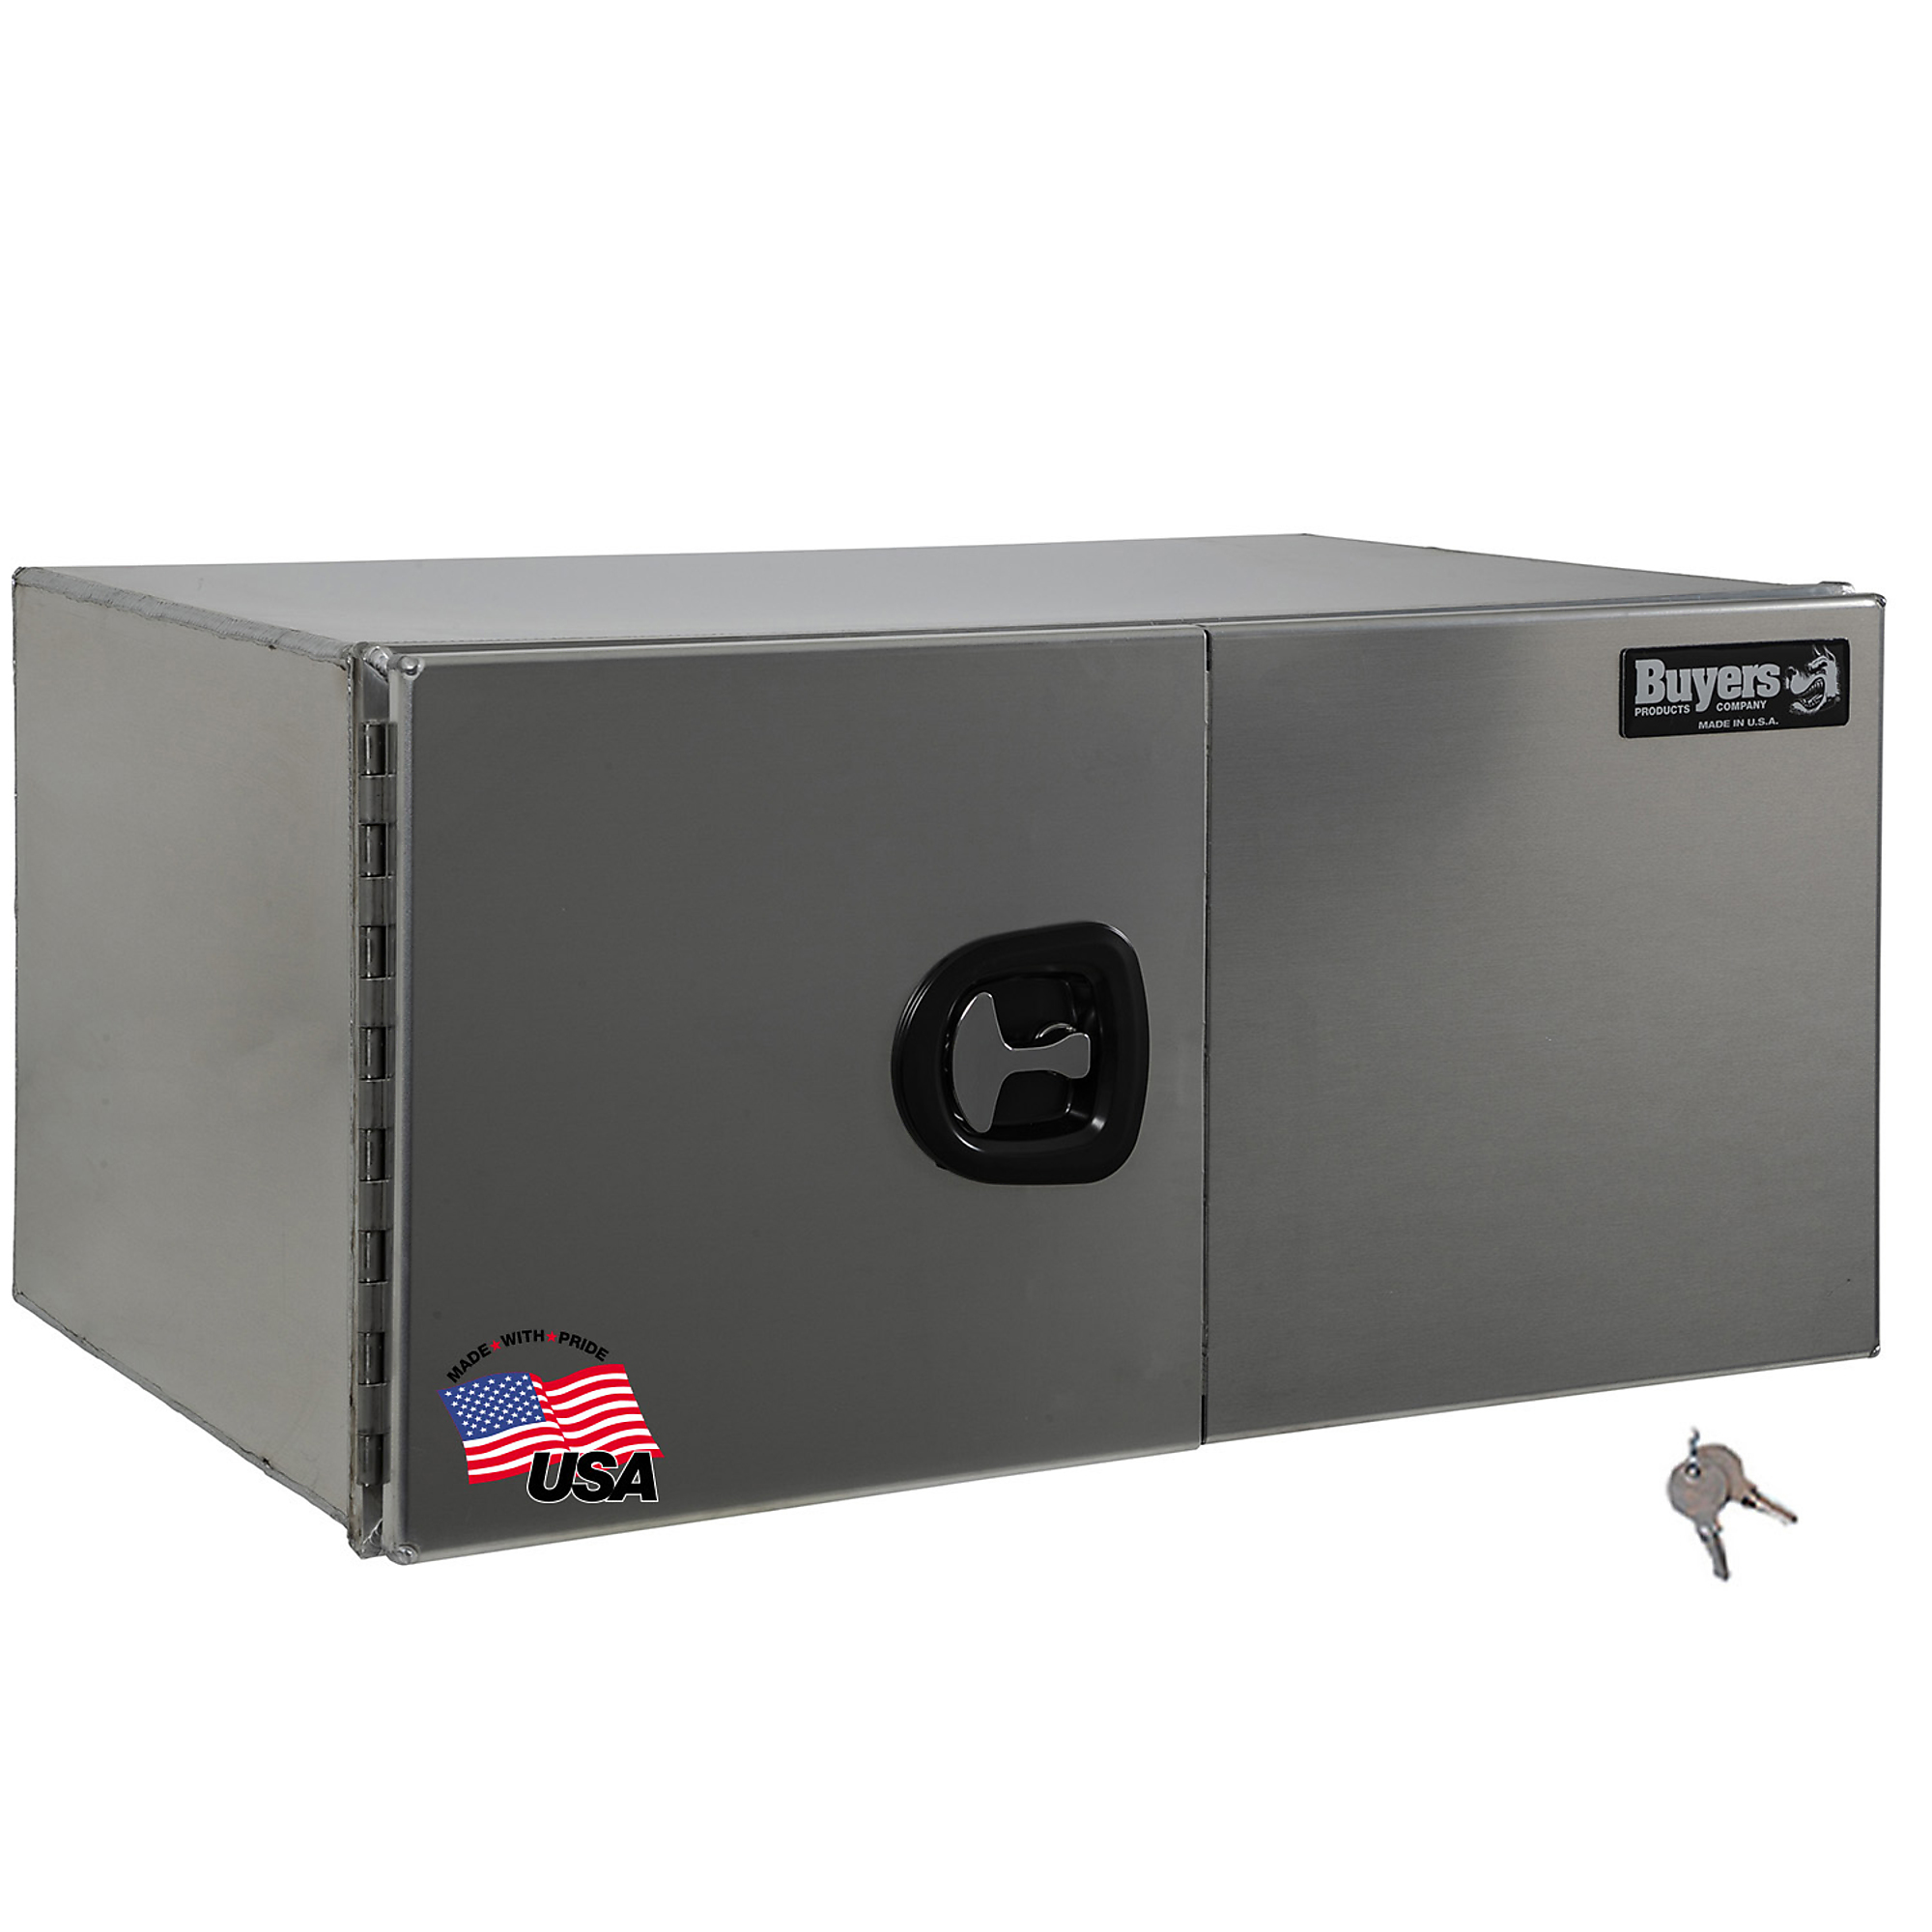 Buyers Products, Barn Door Underbody Truck Box, Width 30 in, Material Aluminum, Color Finish Smooth Silver, Model 1705333